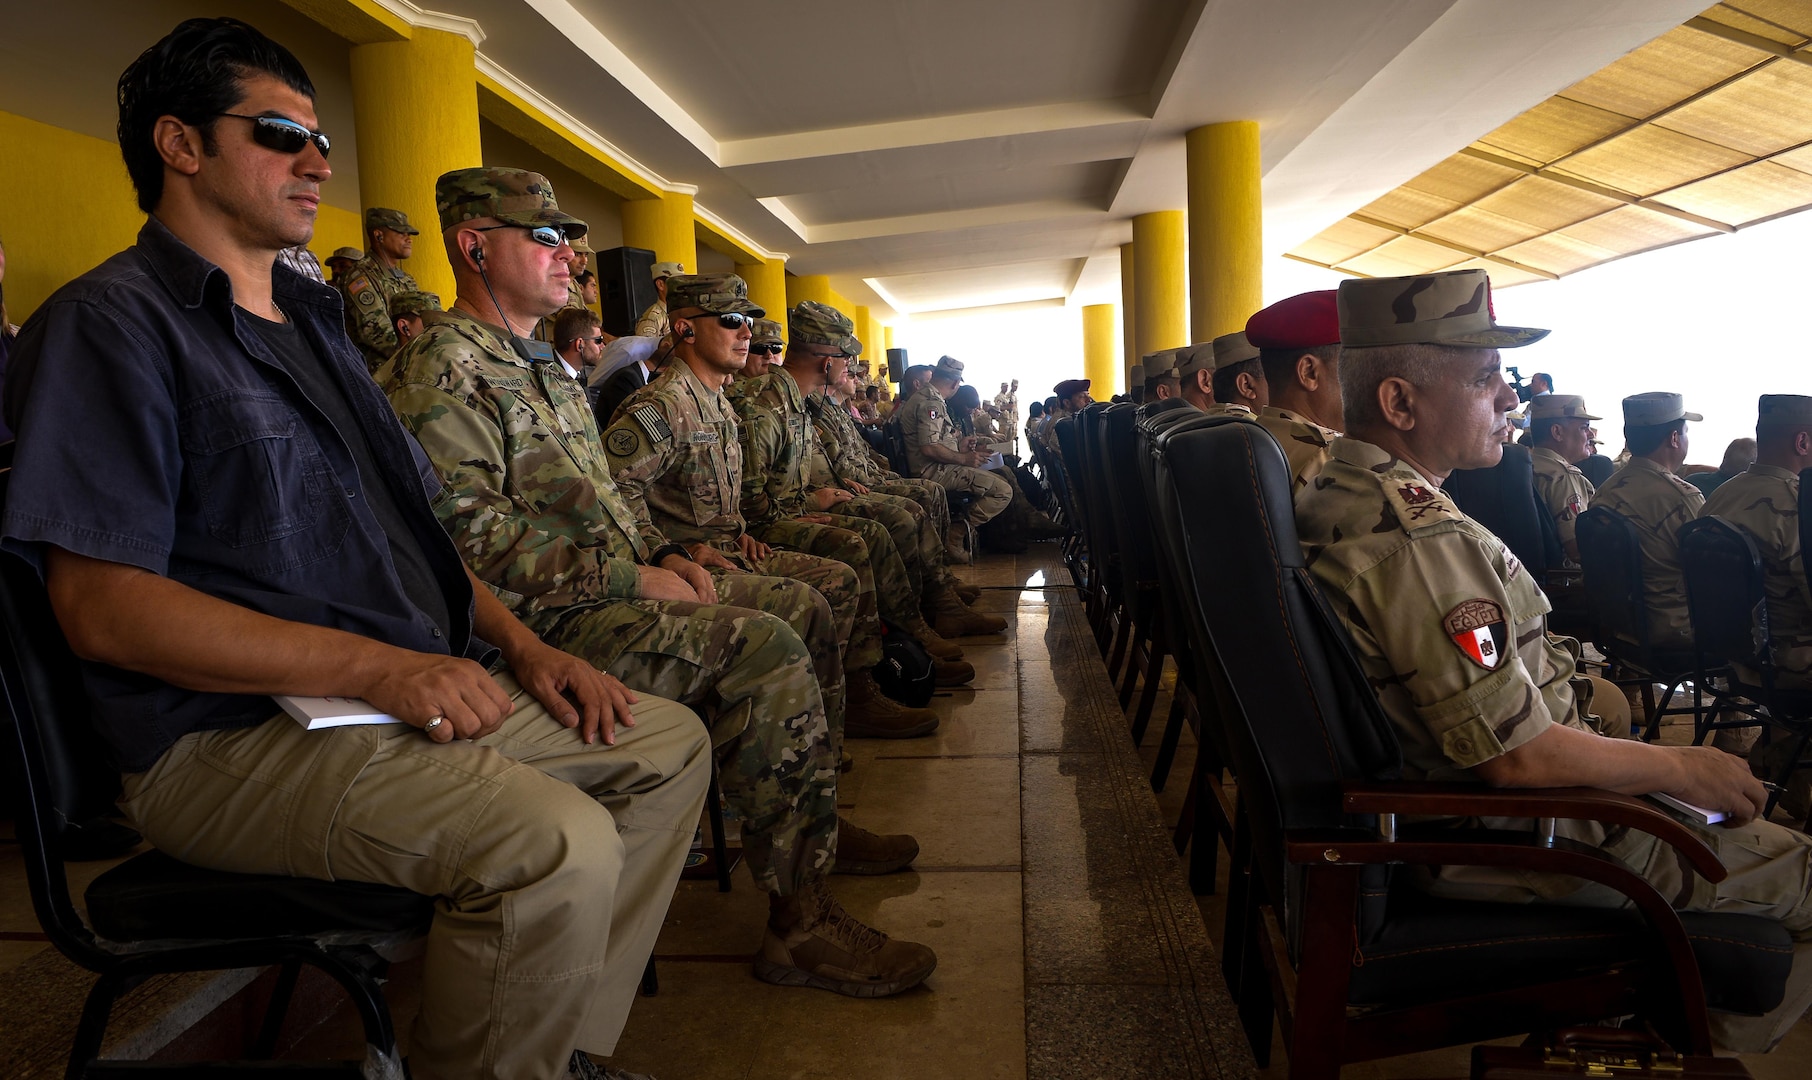 U.S. and Egyptian senior leaders watch a combined arms live fire exercise demonstration during Bright Star 2017, Sept. 20, 2017, at Mohamed Naguib Military Base, Egypt. Bright Star 2017 centralizes around regional security and cooperation, and promoting interoperability in conventional and irregular warfare scenarios. (U.S. Air Force photo by Staff Sgt. Michael Battles)